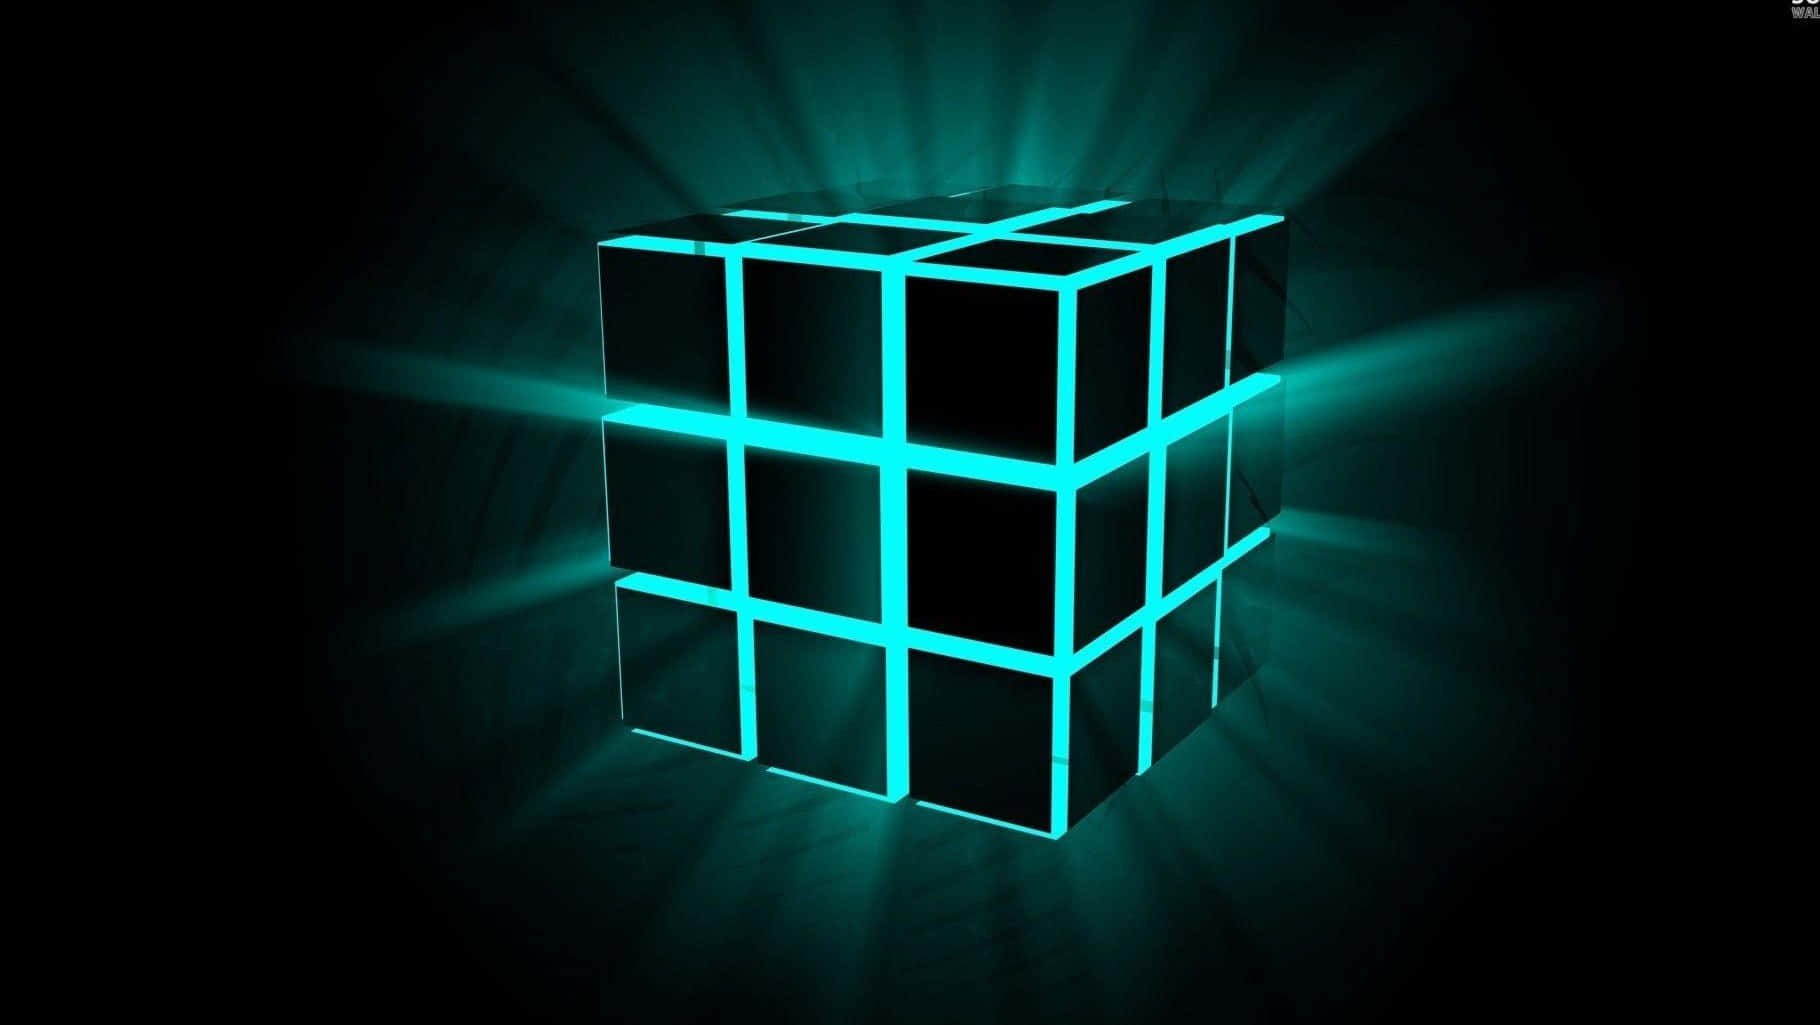 A Cube With A Light Shining Through It